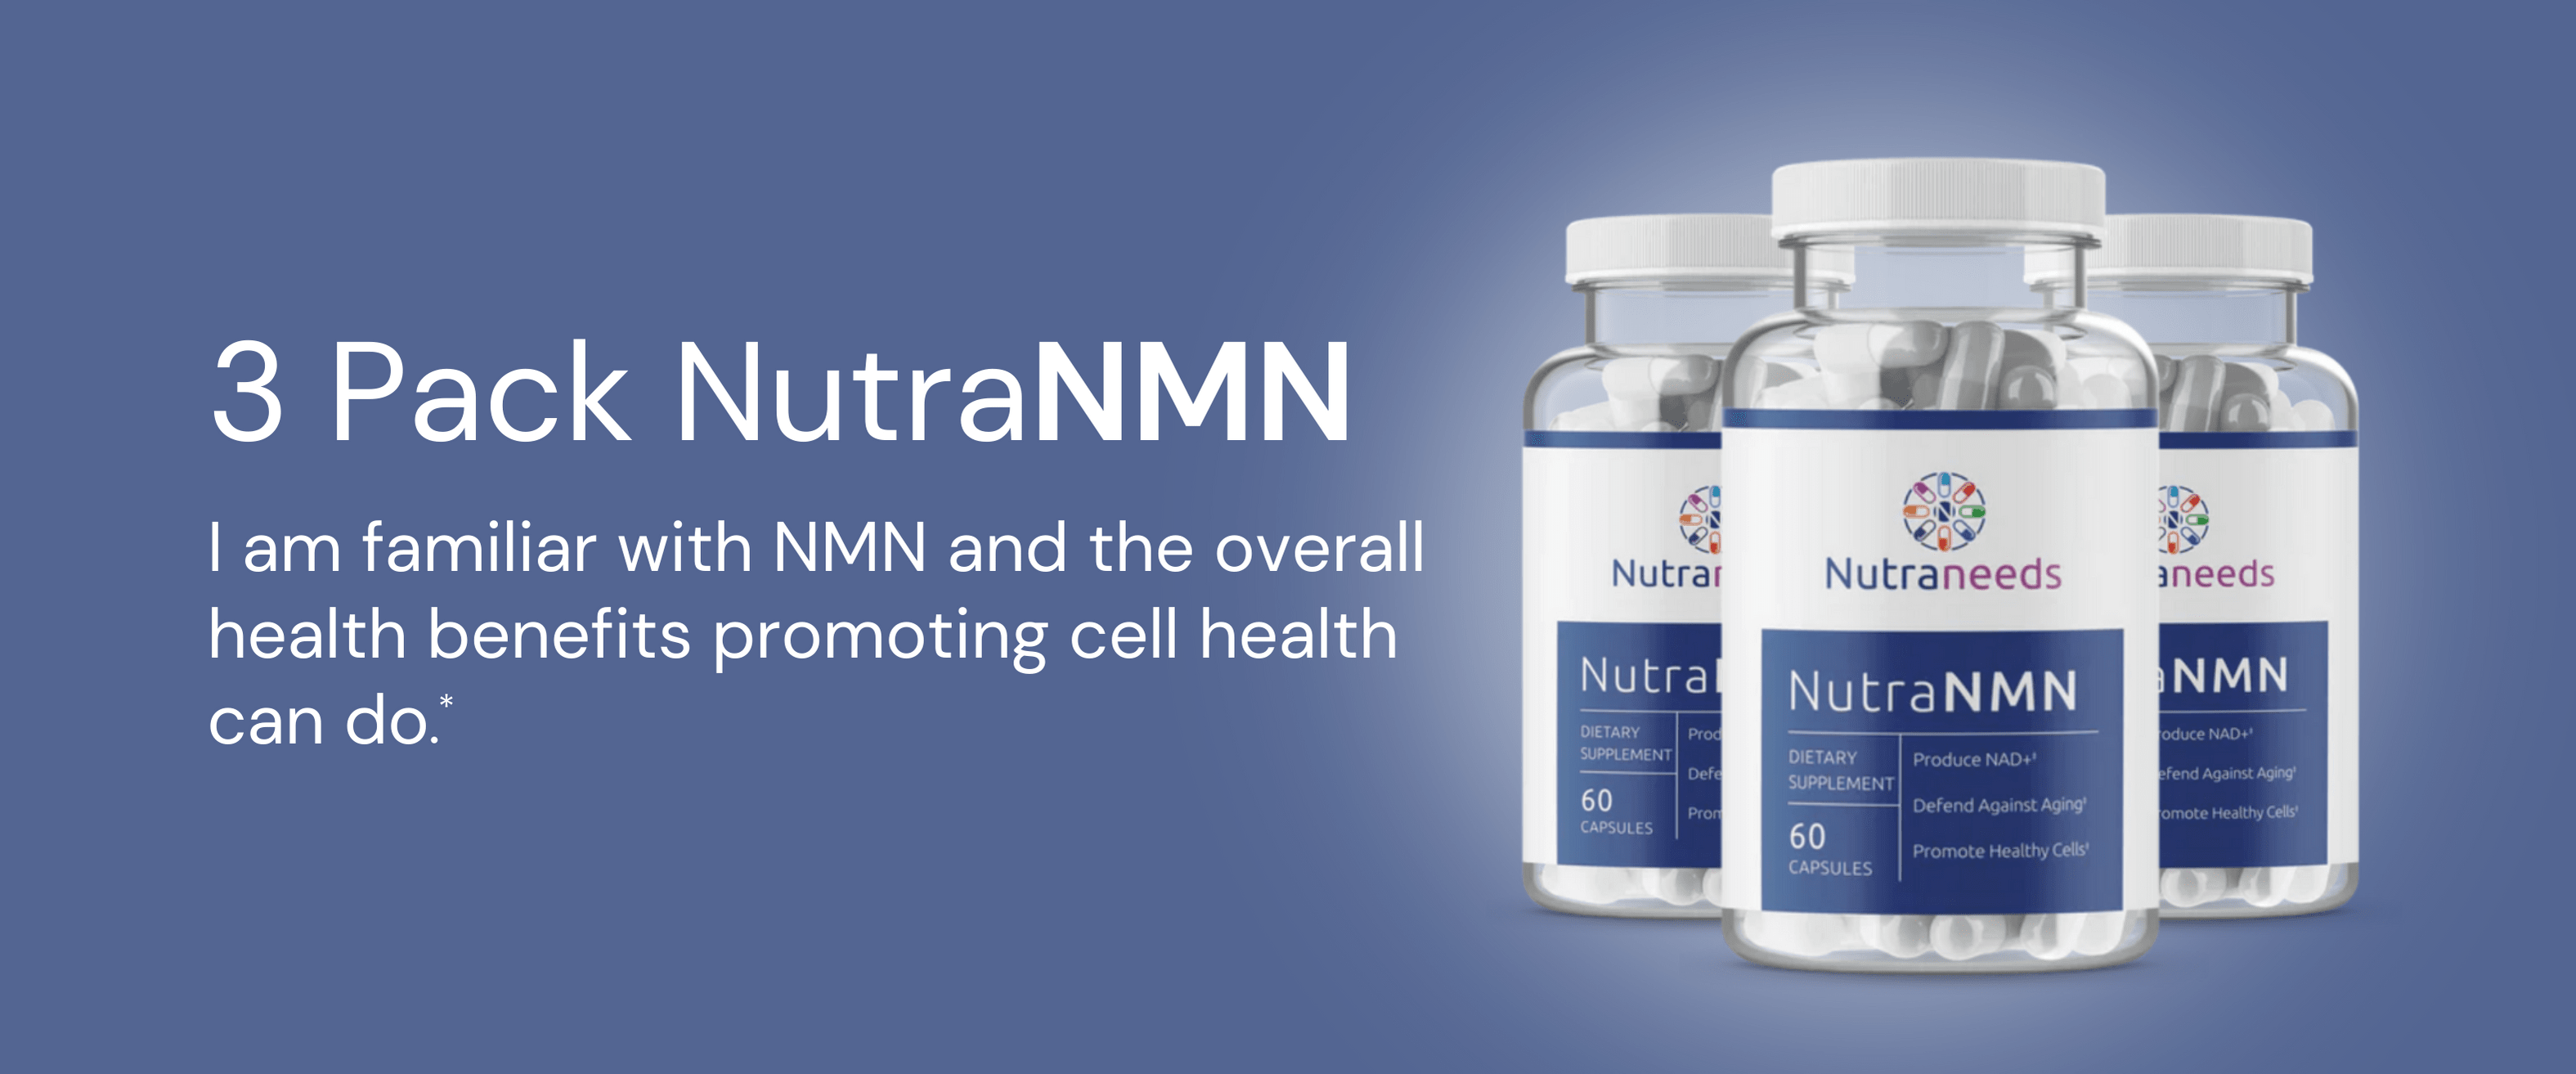 3 Pack of NutraNMN to promote cell growth